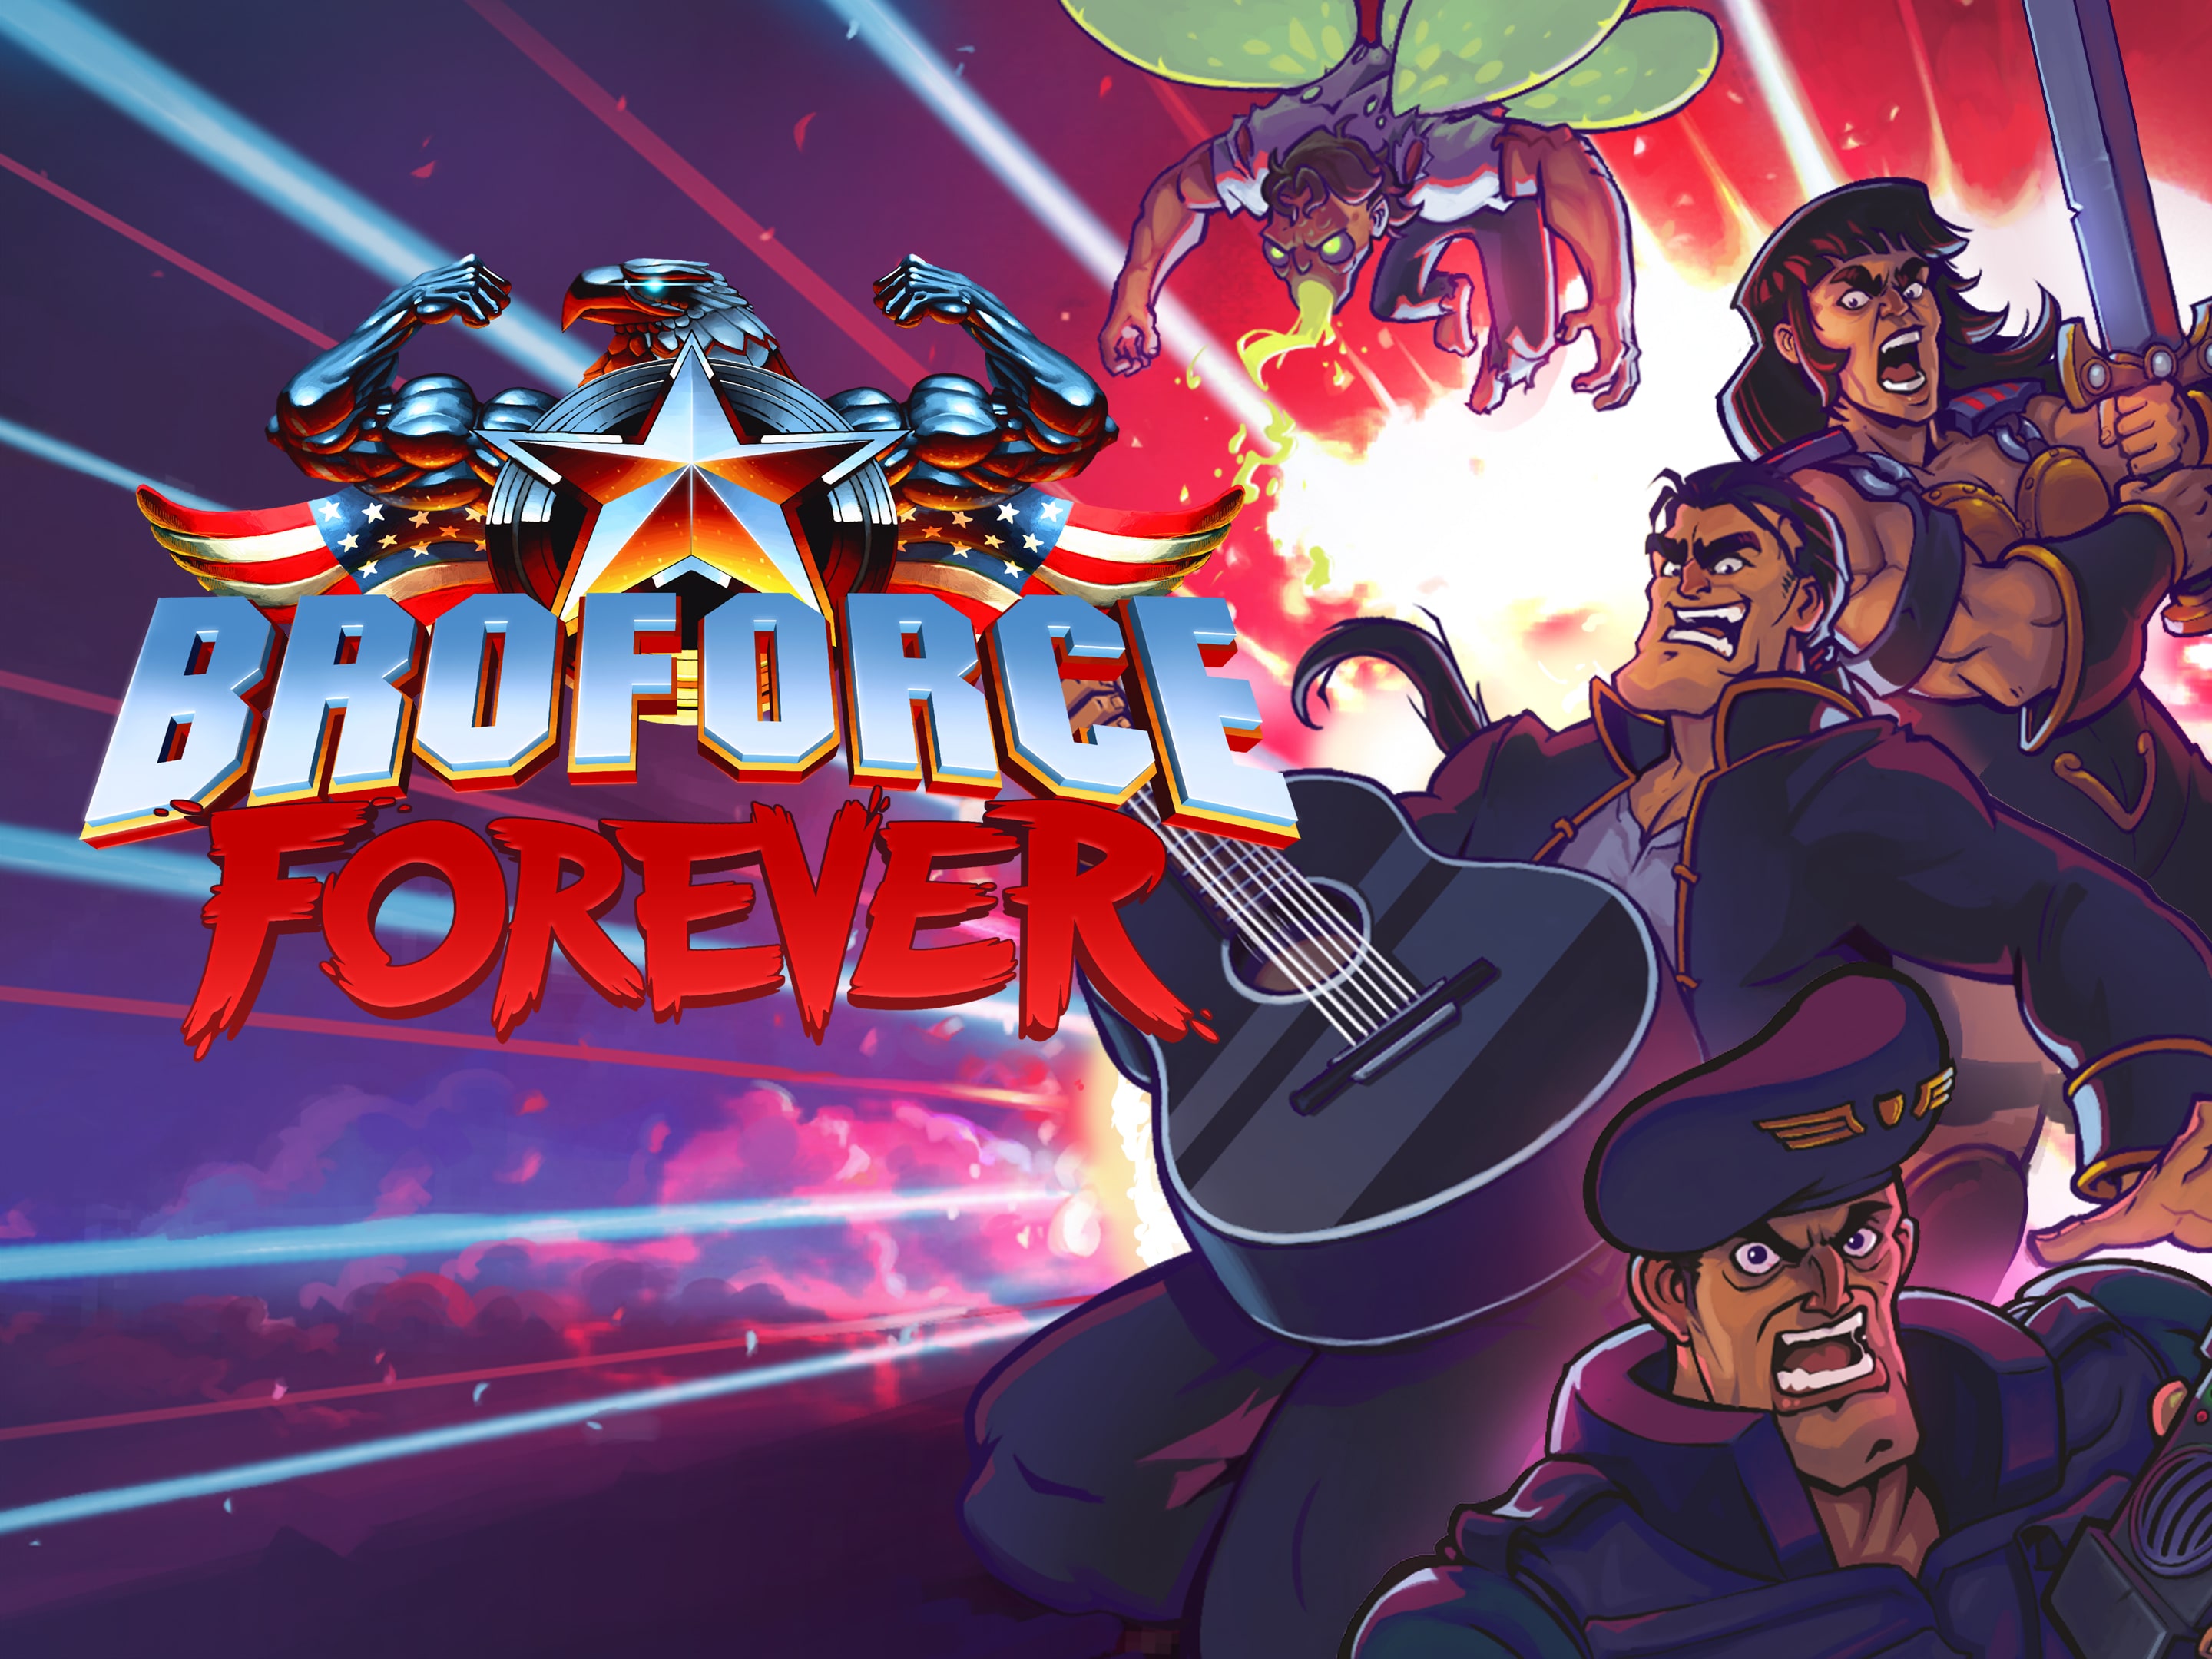 Broforce - Deluxe Edition - PS4